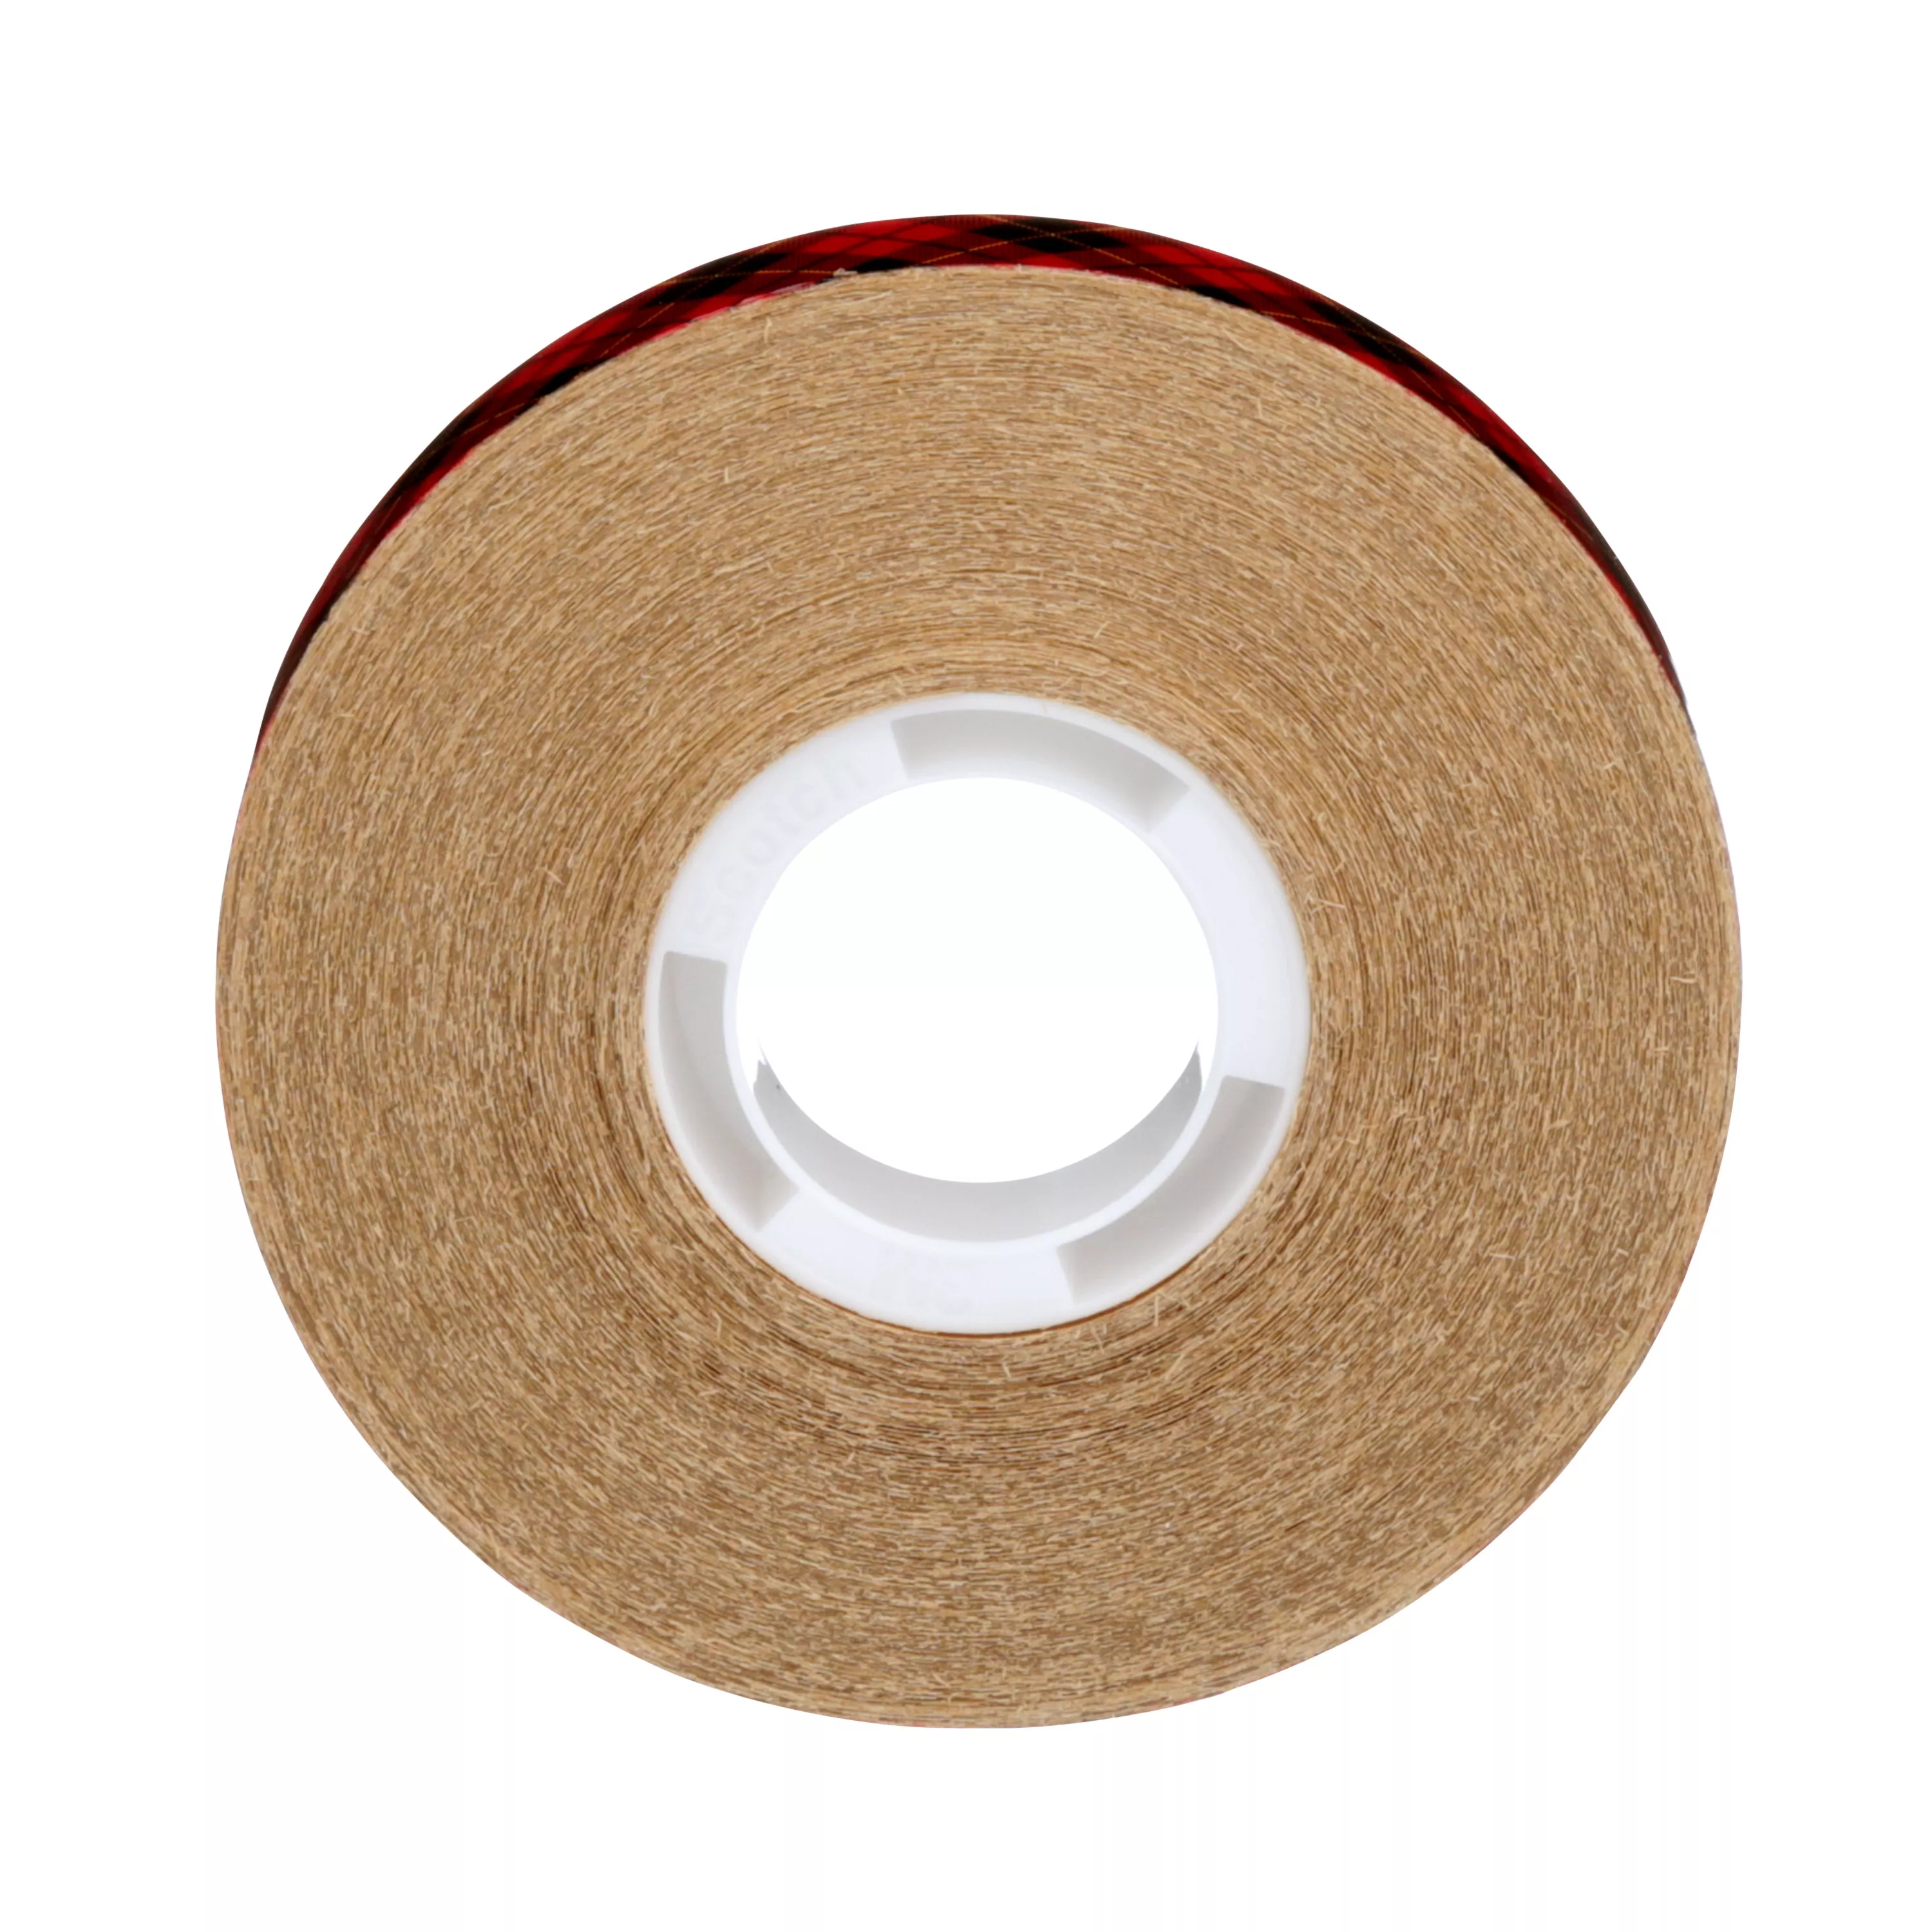 Product Number 924 | Scotch® ATG Adhesive Transfer Tape 924